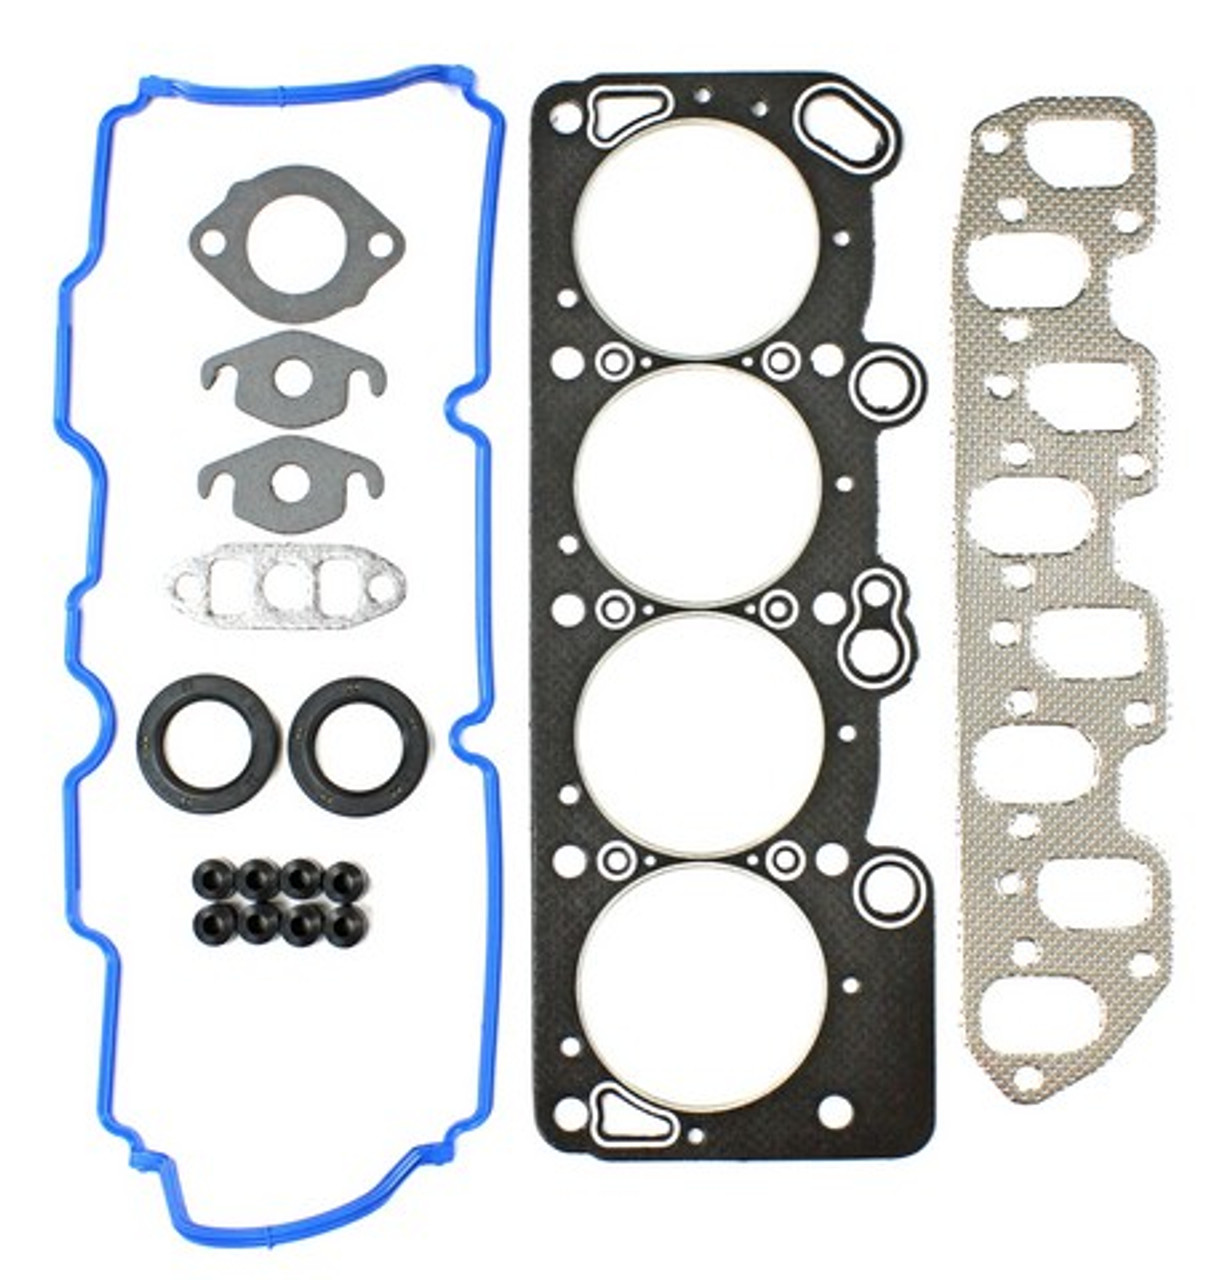 Head Gasket Set 2.5L 1993 Plymouth Voyager - HGS146.47